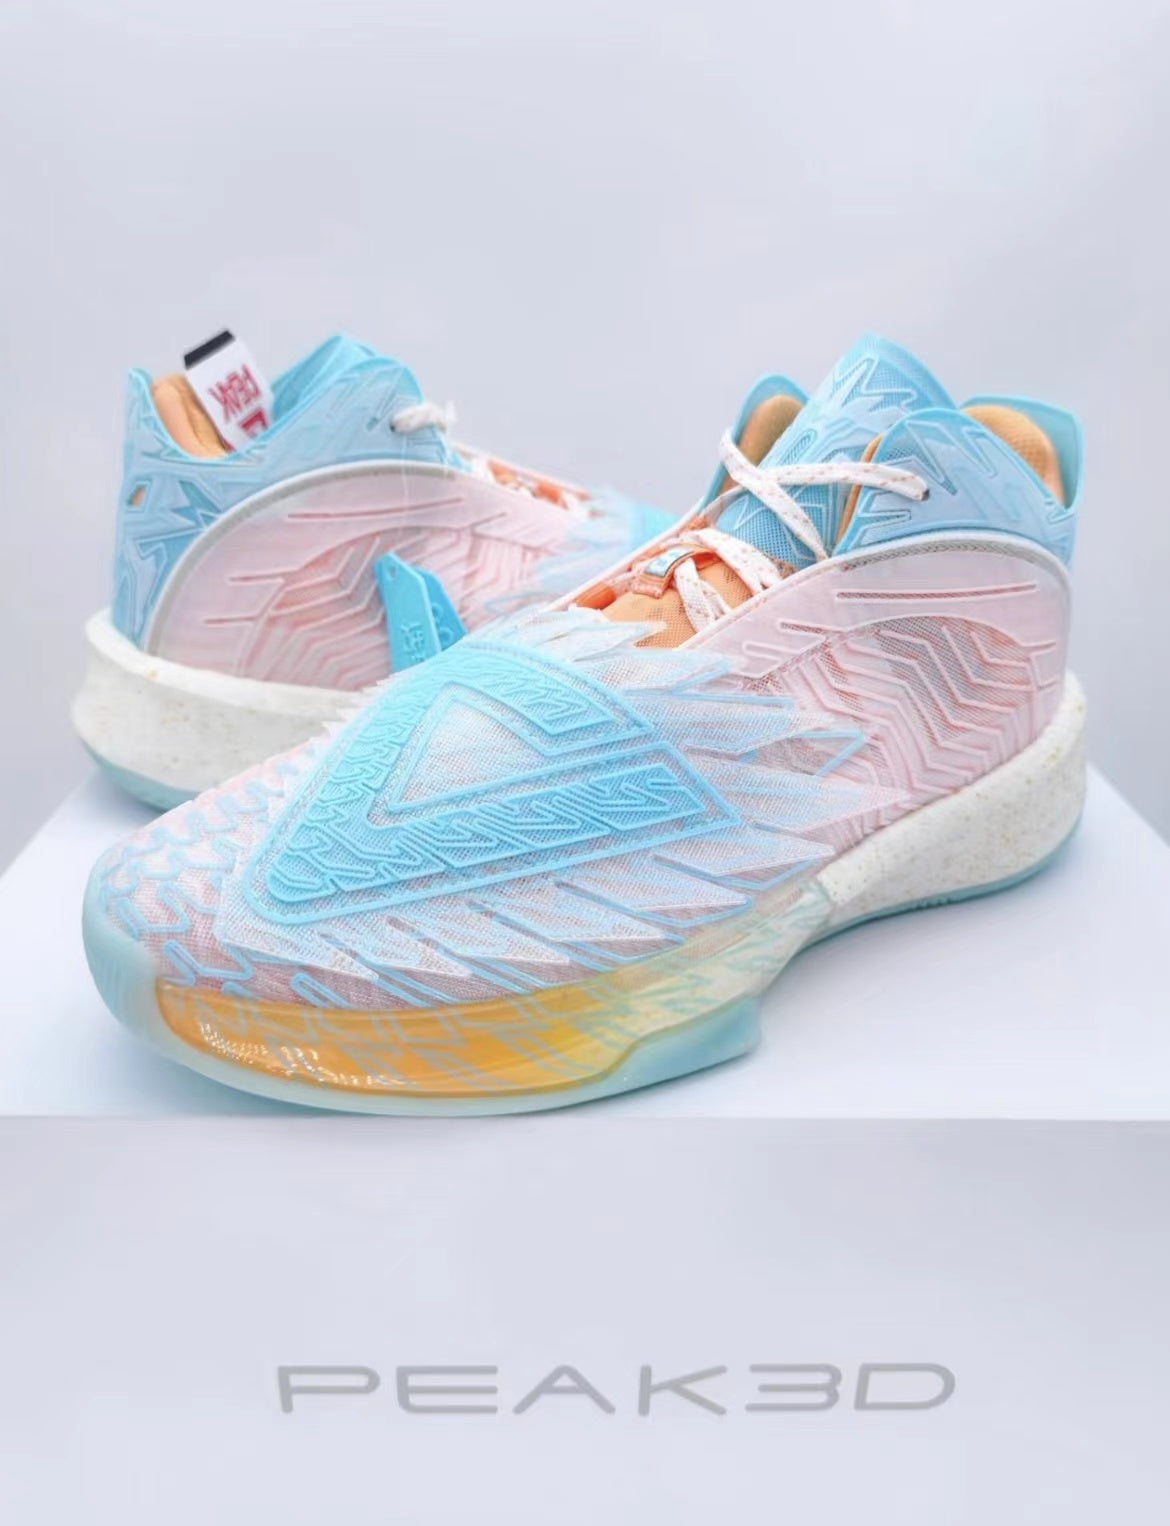 Andrew Wiggins x Peak Big Triangle 3D Printed Basketball Shoes - Pink/Blue